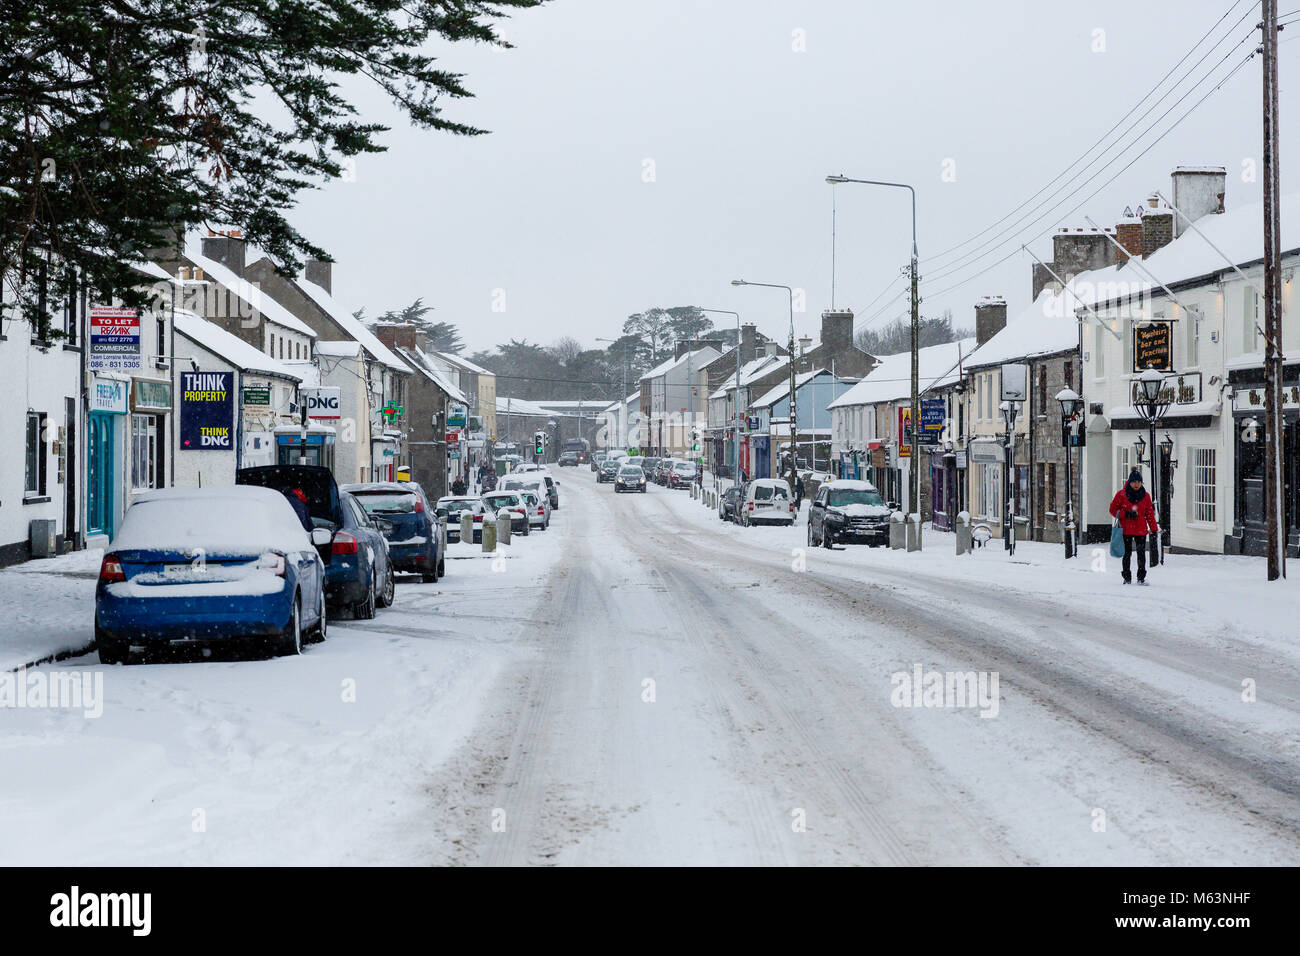 Celbridge, Kildare, Ireland. 28 Feb 2018: Main street in Celbridge covered in snow as extreme weather conditions continue across Ireland. Beast from the east hits Irish towns. Heavy snow fall in Celbridge county Kildare. Stock Photo